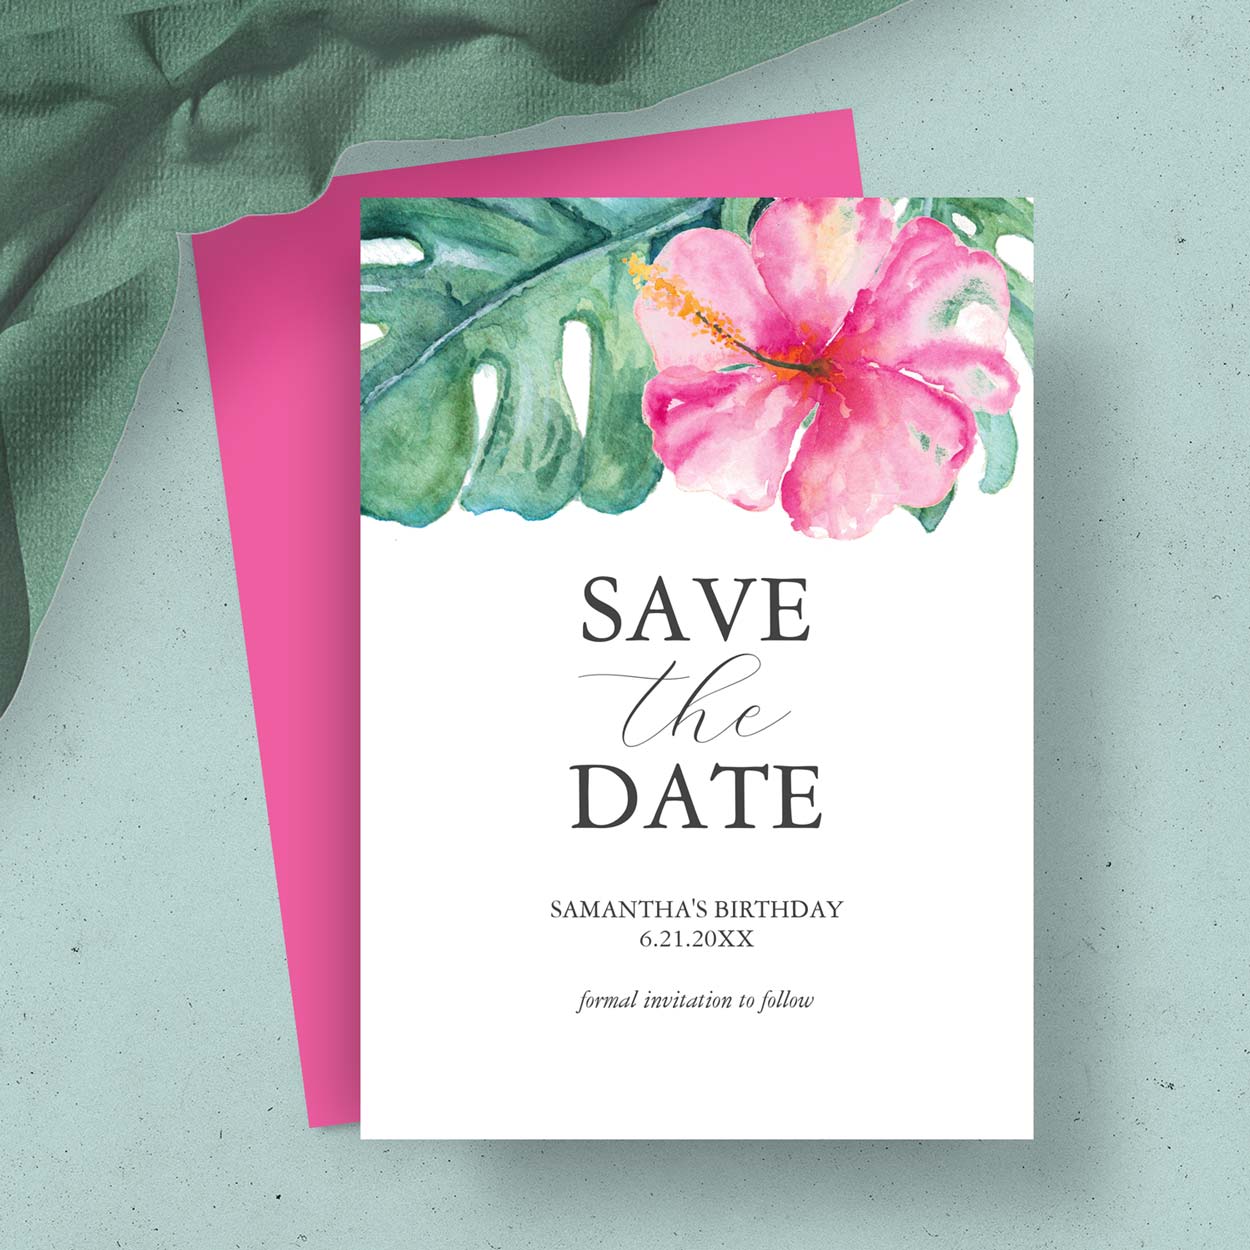 destination weddings beautiful wedding announcements tropical pink hibiscus flowers and monstera palm leaves watercolor art by Victoria Grigaliunas